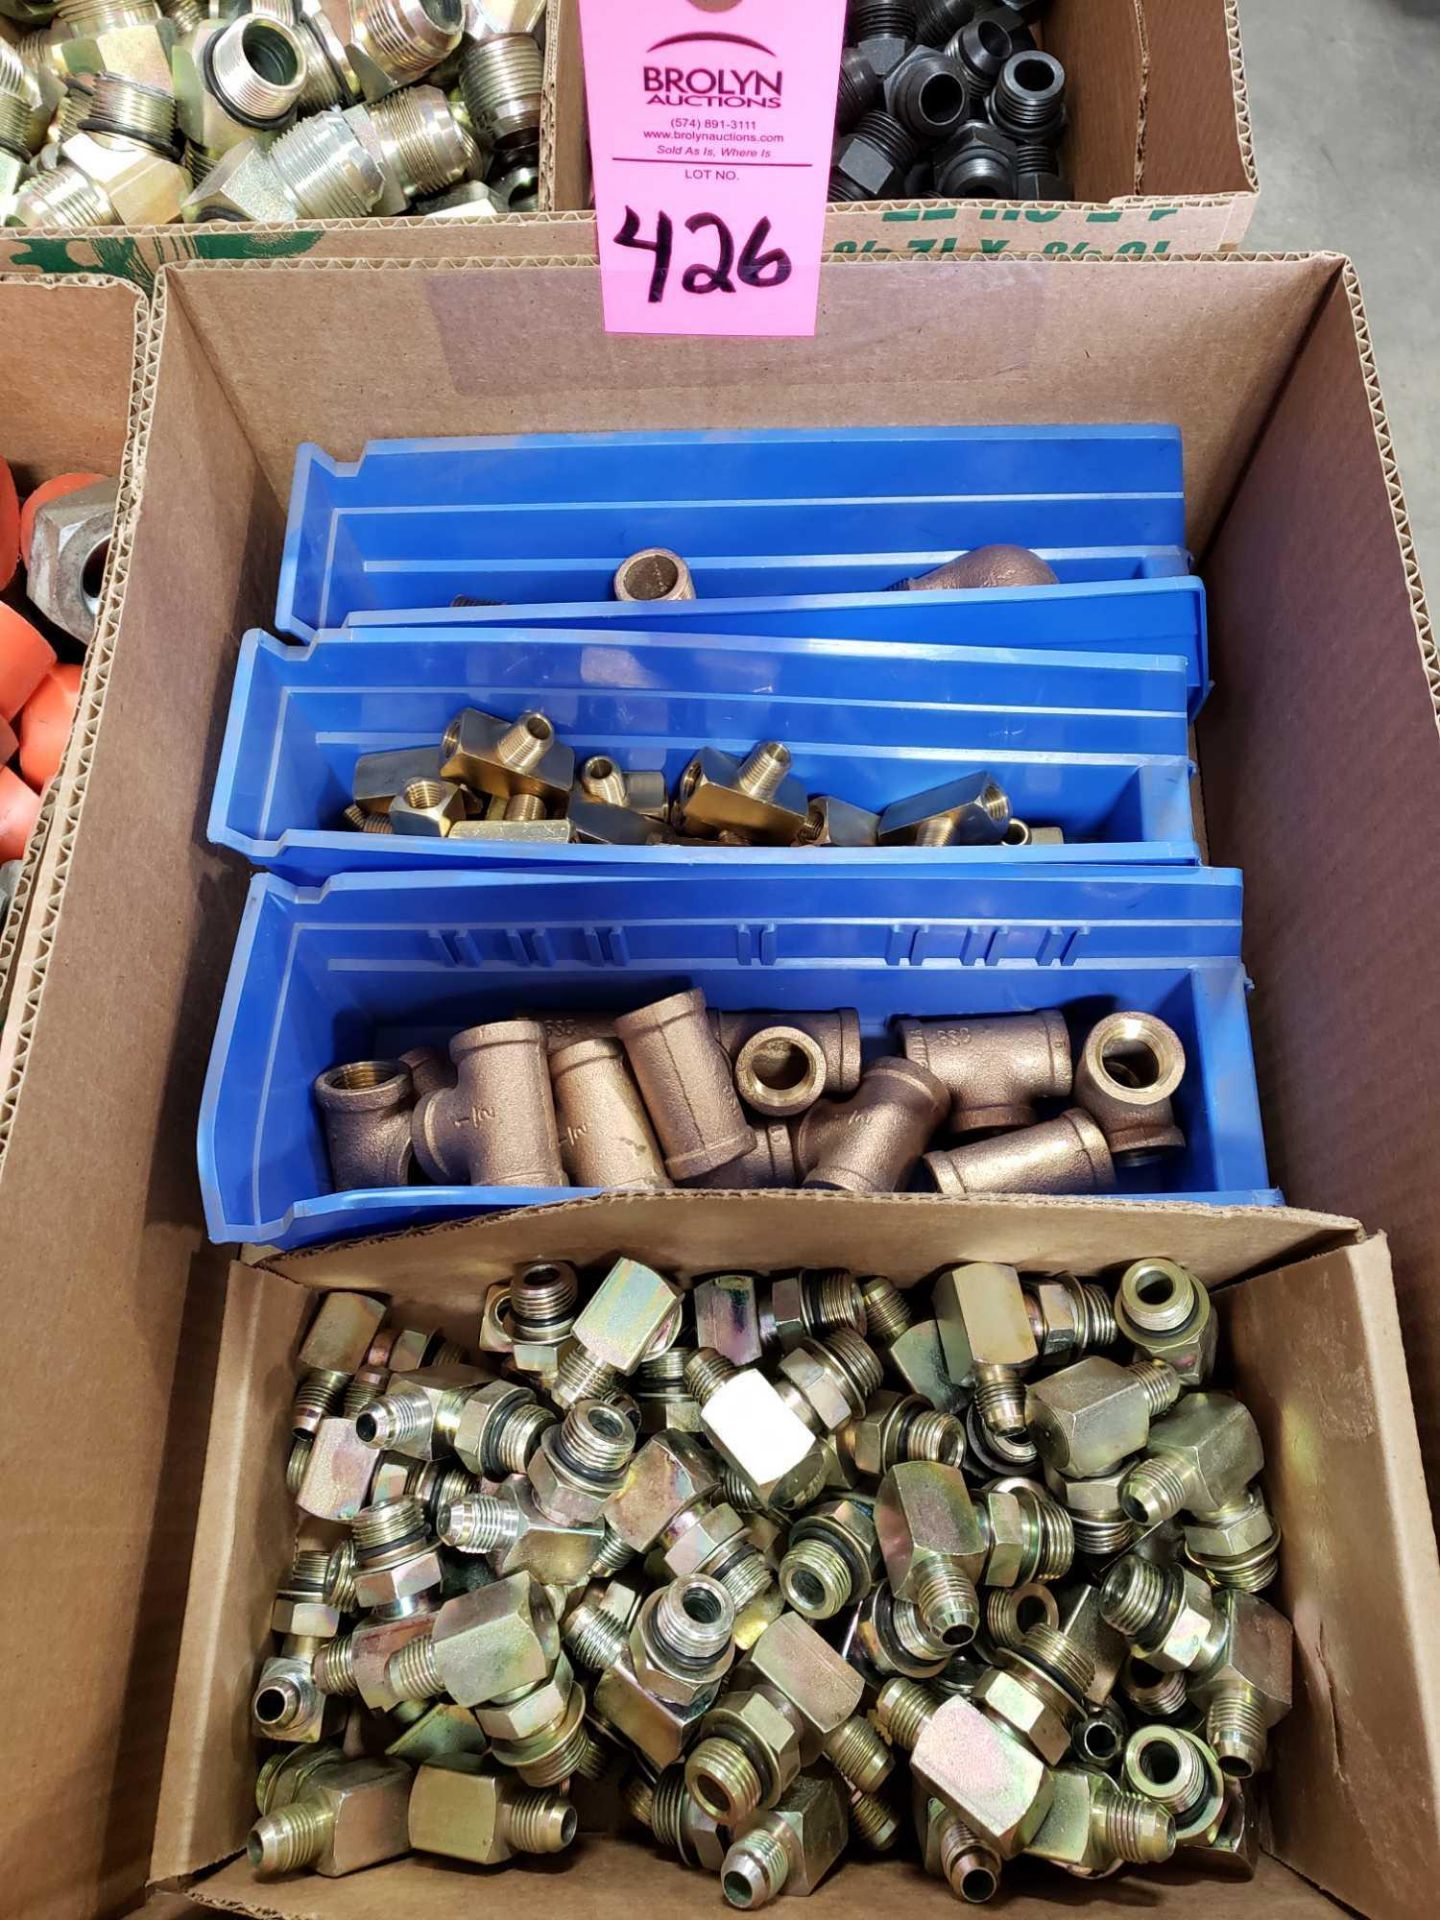 Lot of assorted hydraulic fittings, some brass. New as pictured.